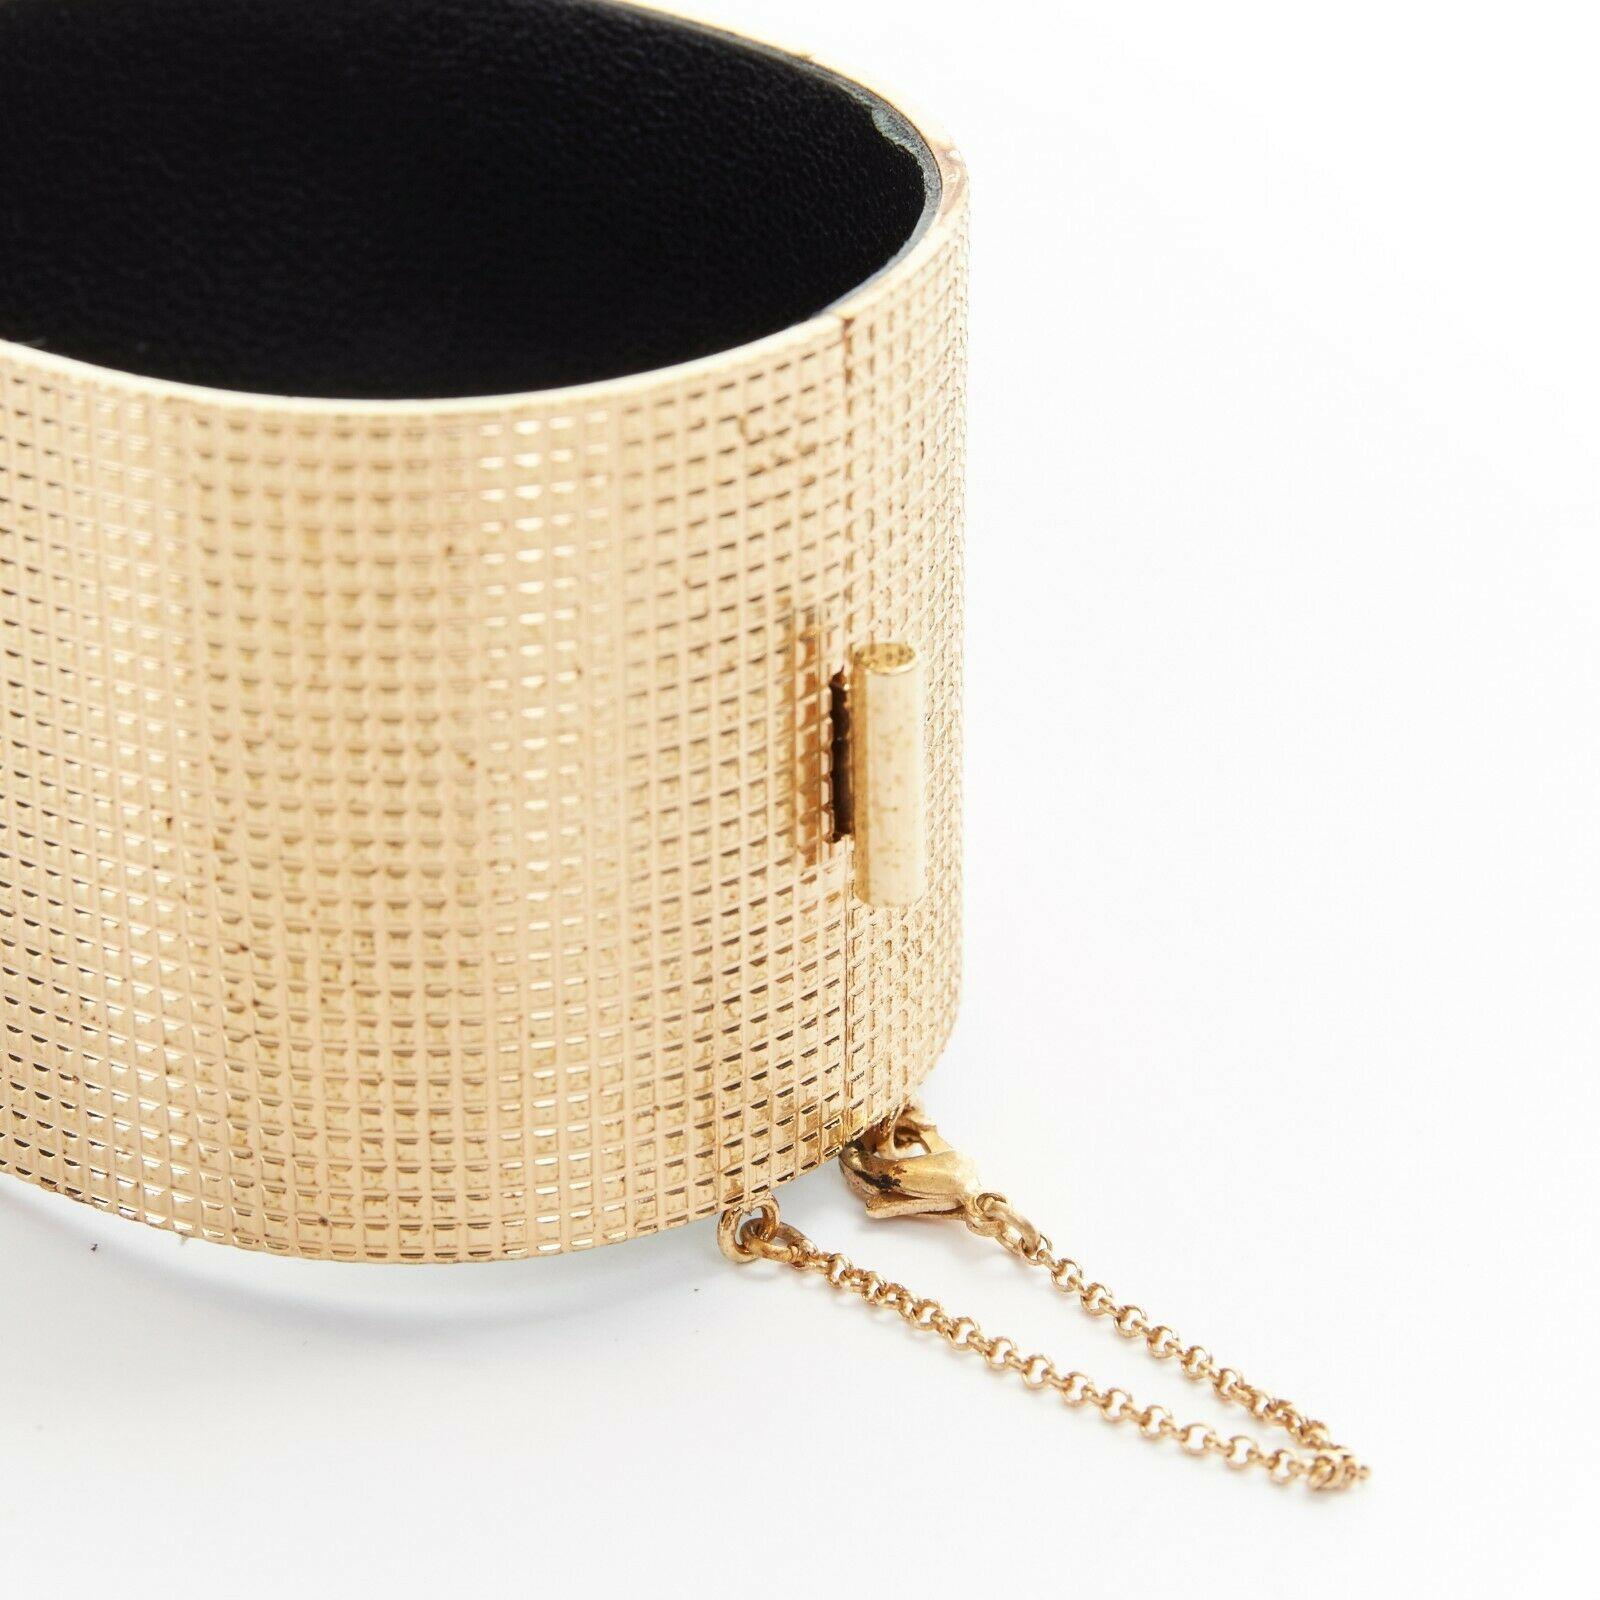 CELINE PHOEBE PHILO Manchette gold-tone grid textured bracelet cuff bangle

CELINE BY PHOEBE PHILO
Céline Manchette Edge cuff .
Gold hardware . Orange pony skin . Hinged closure and bracelet . Designer size S . Made in Italy

CONDITION
Excellent, no